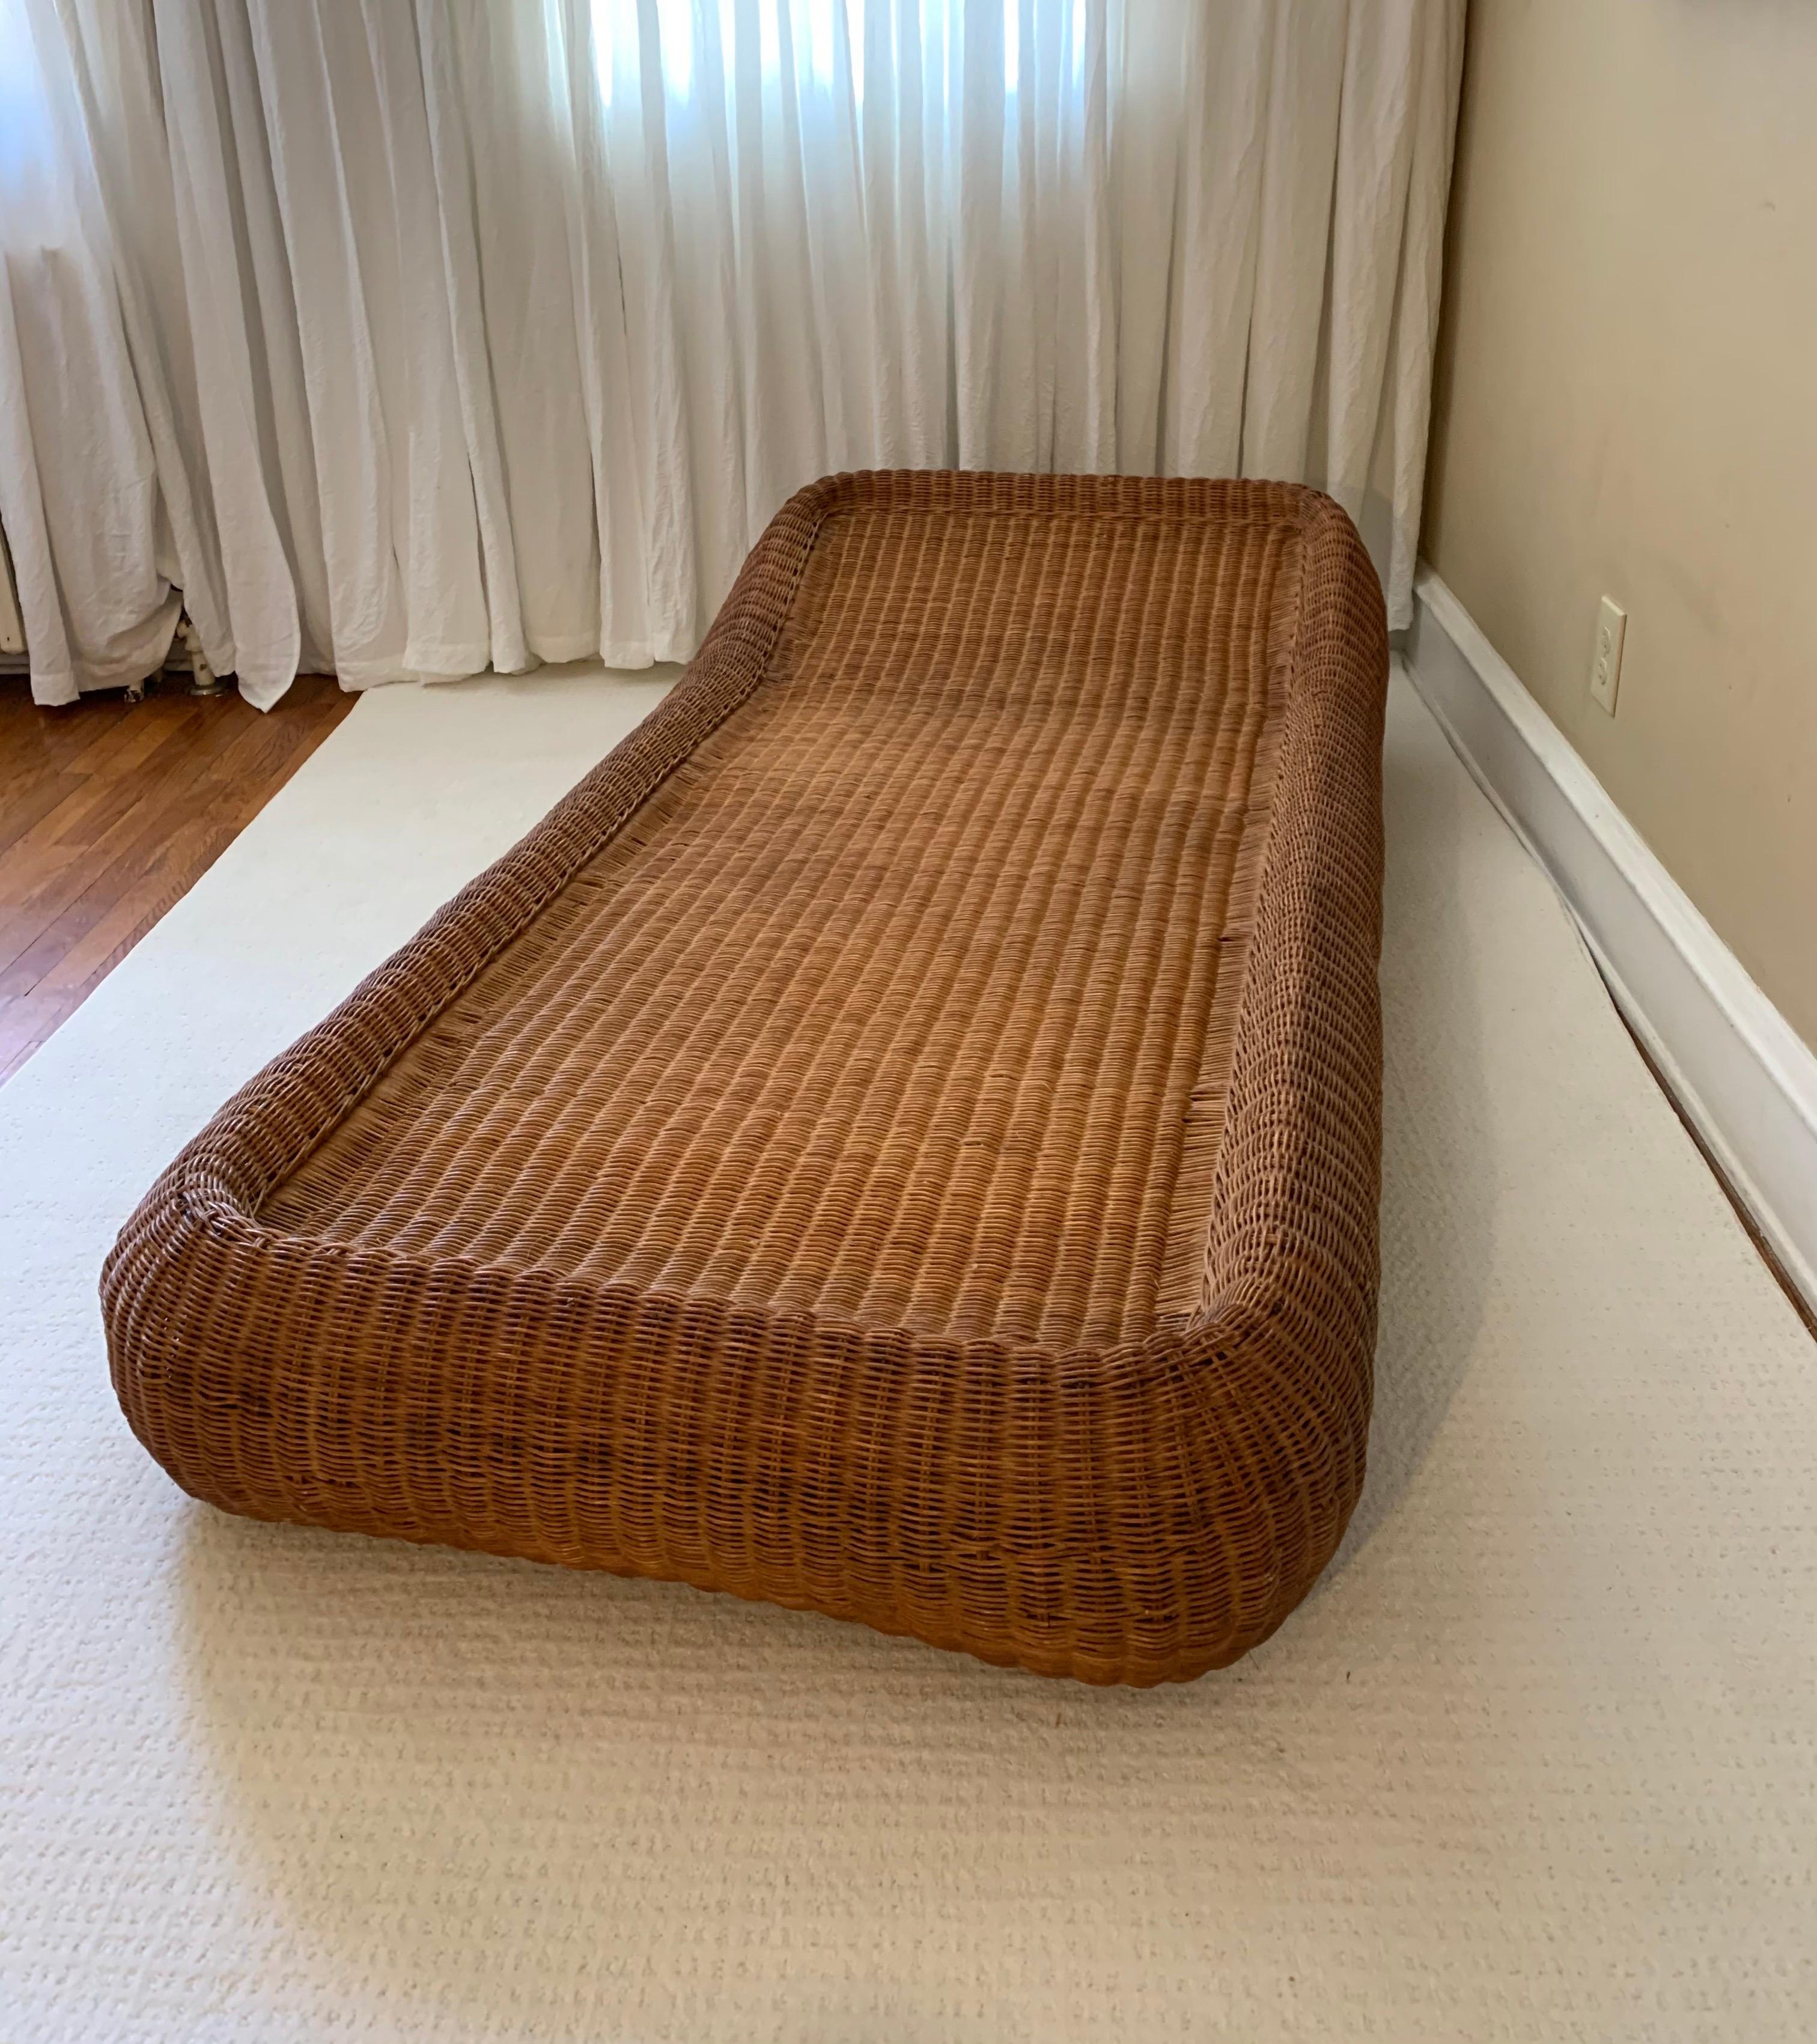 Hand-Woven Vintage Handwoven Wicker Chaise Lounge, 1970’s